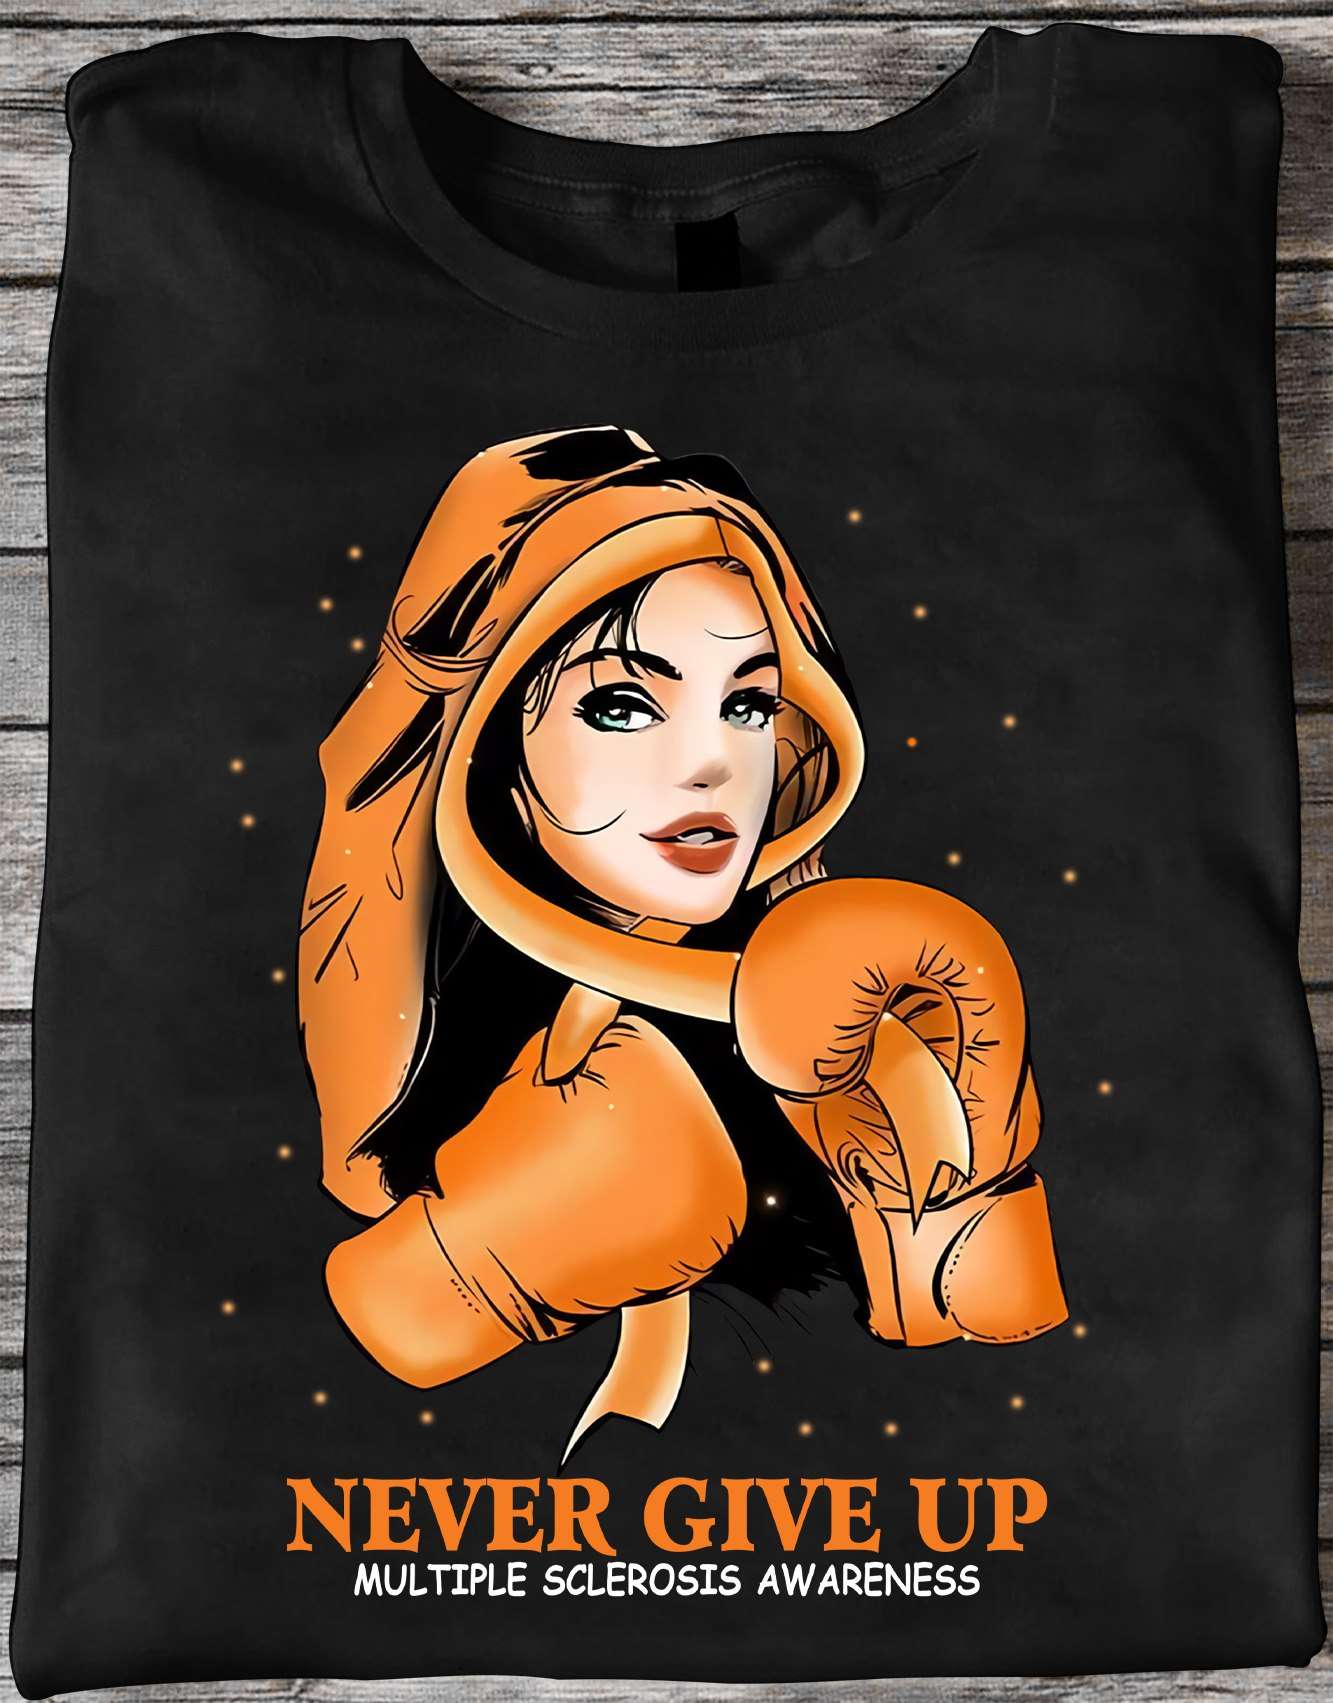 Never give up - Strong boxing woman, multiple sclerosis awareness